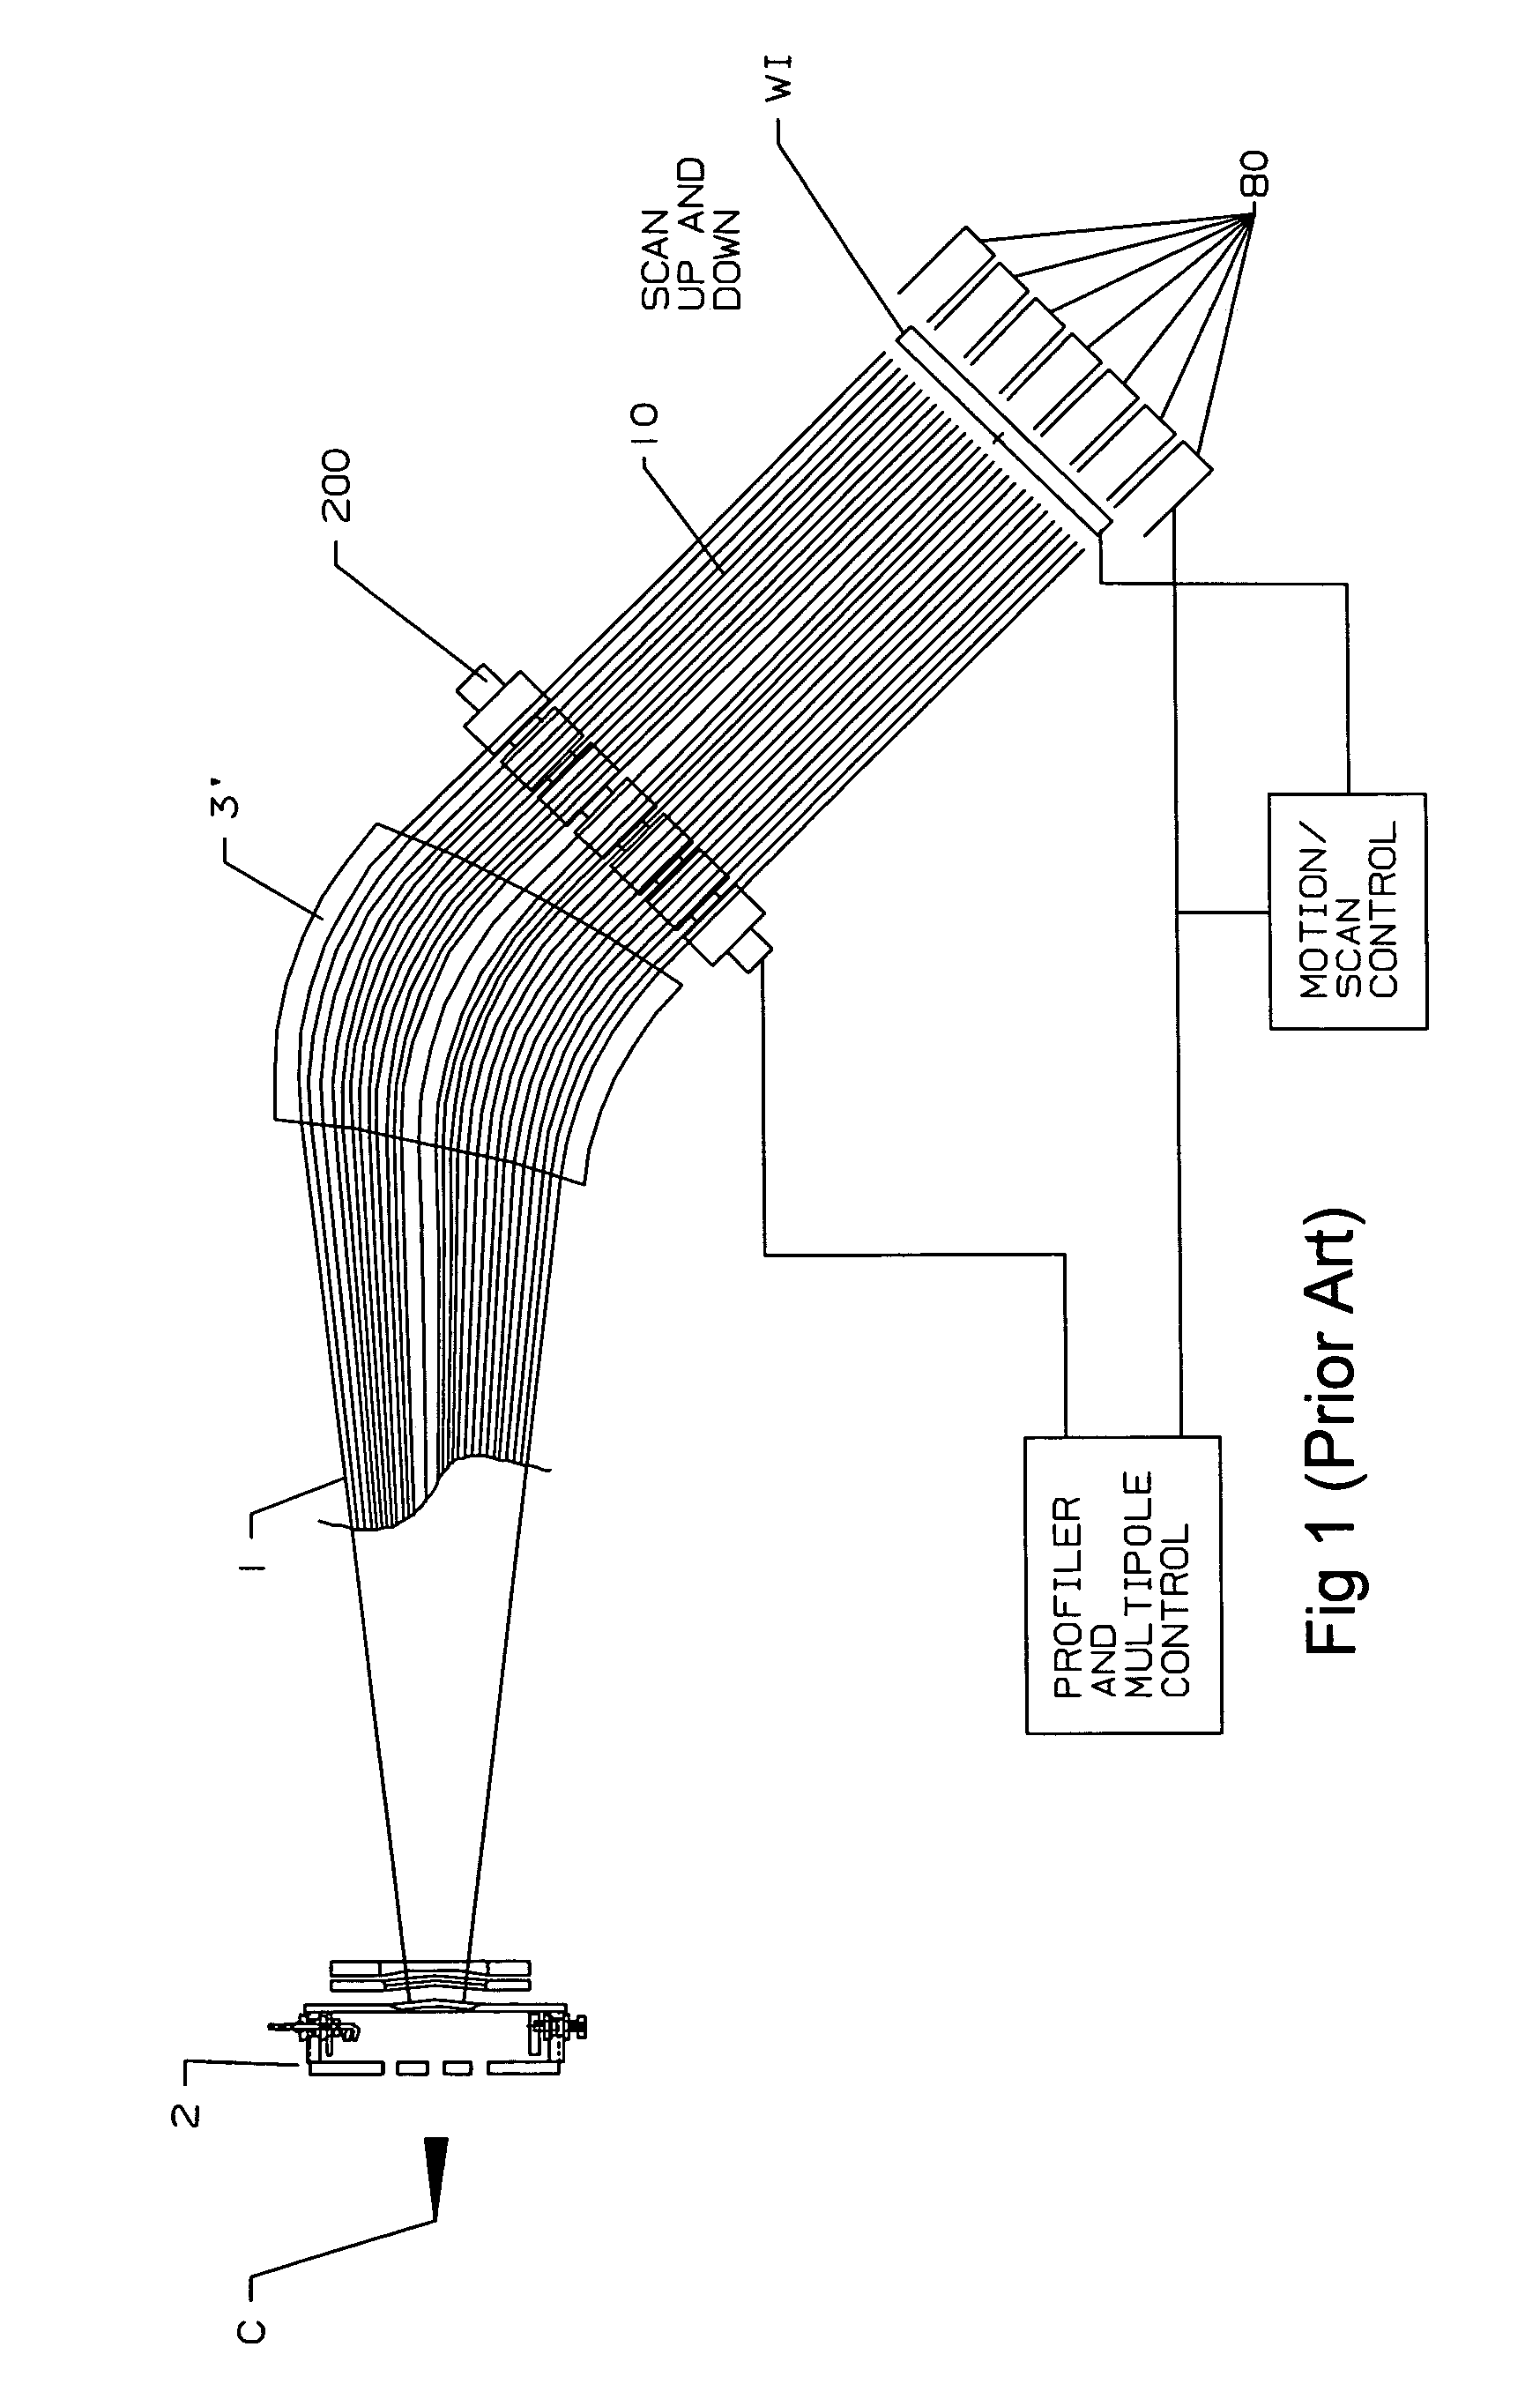 High aspect ratio, high mass resolution analyzer magnet and system for ribbon ion beams